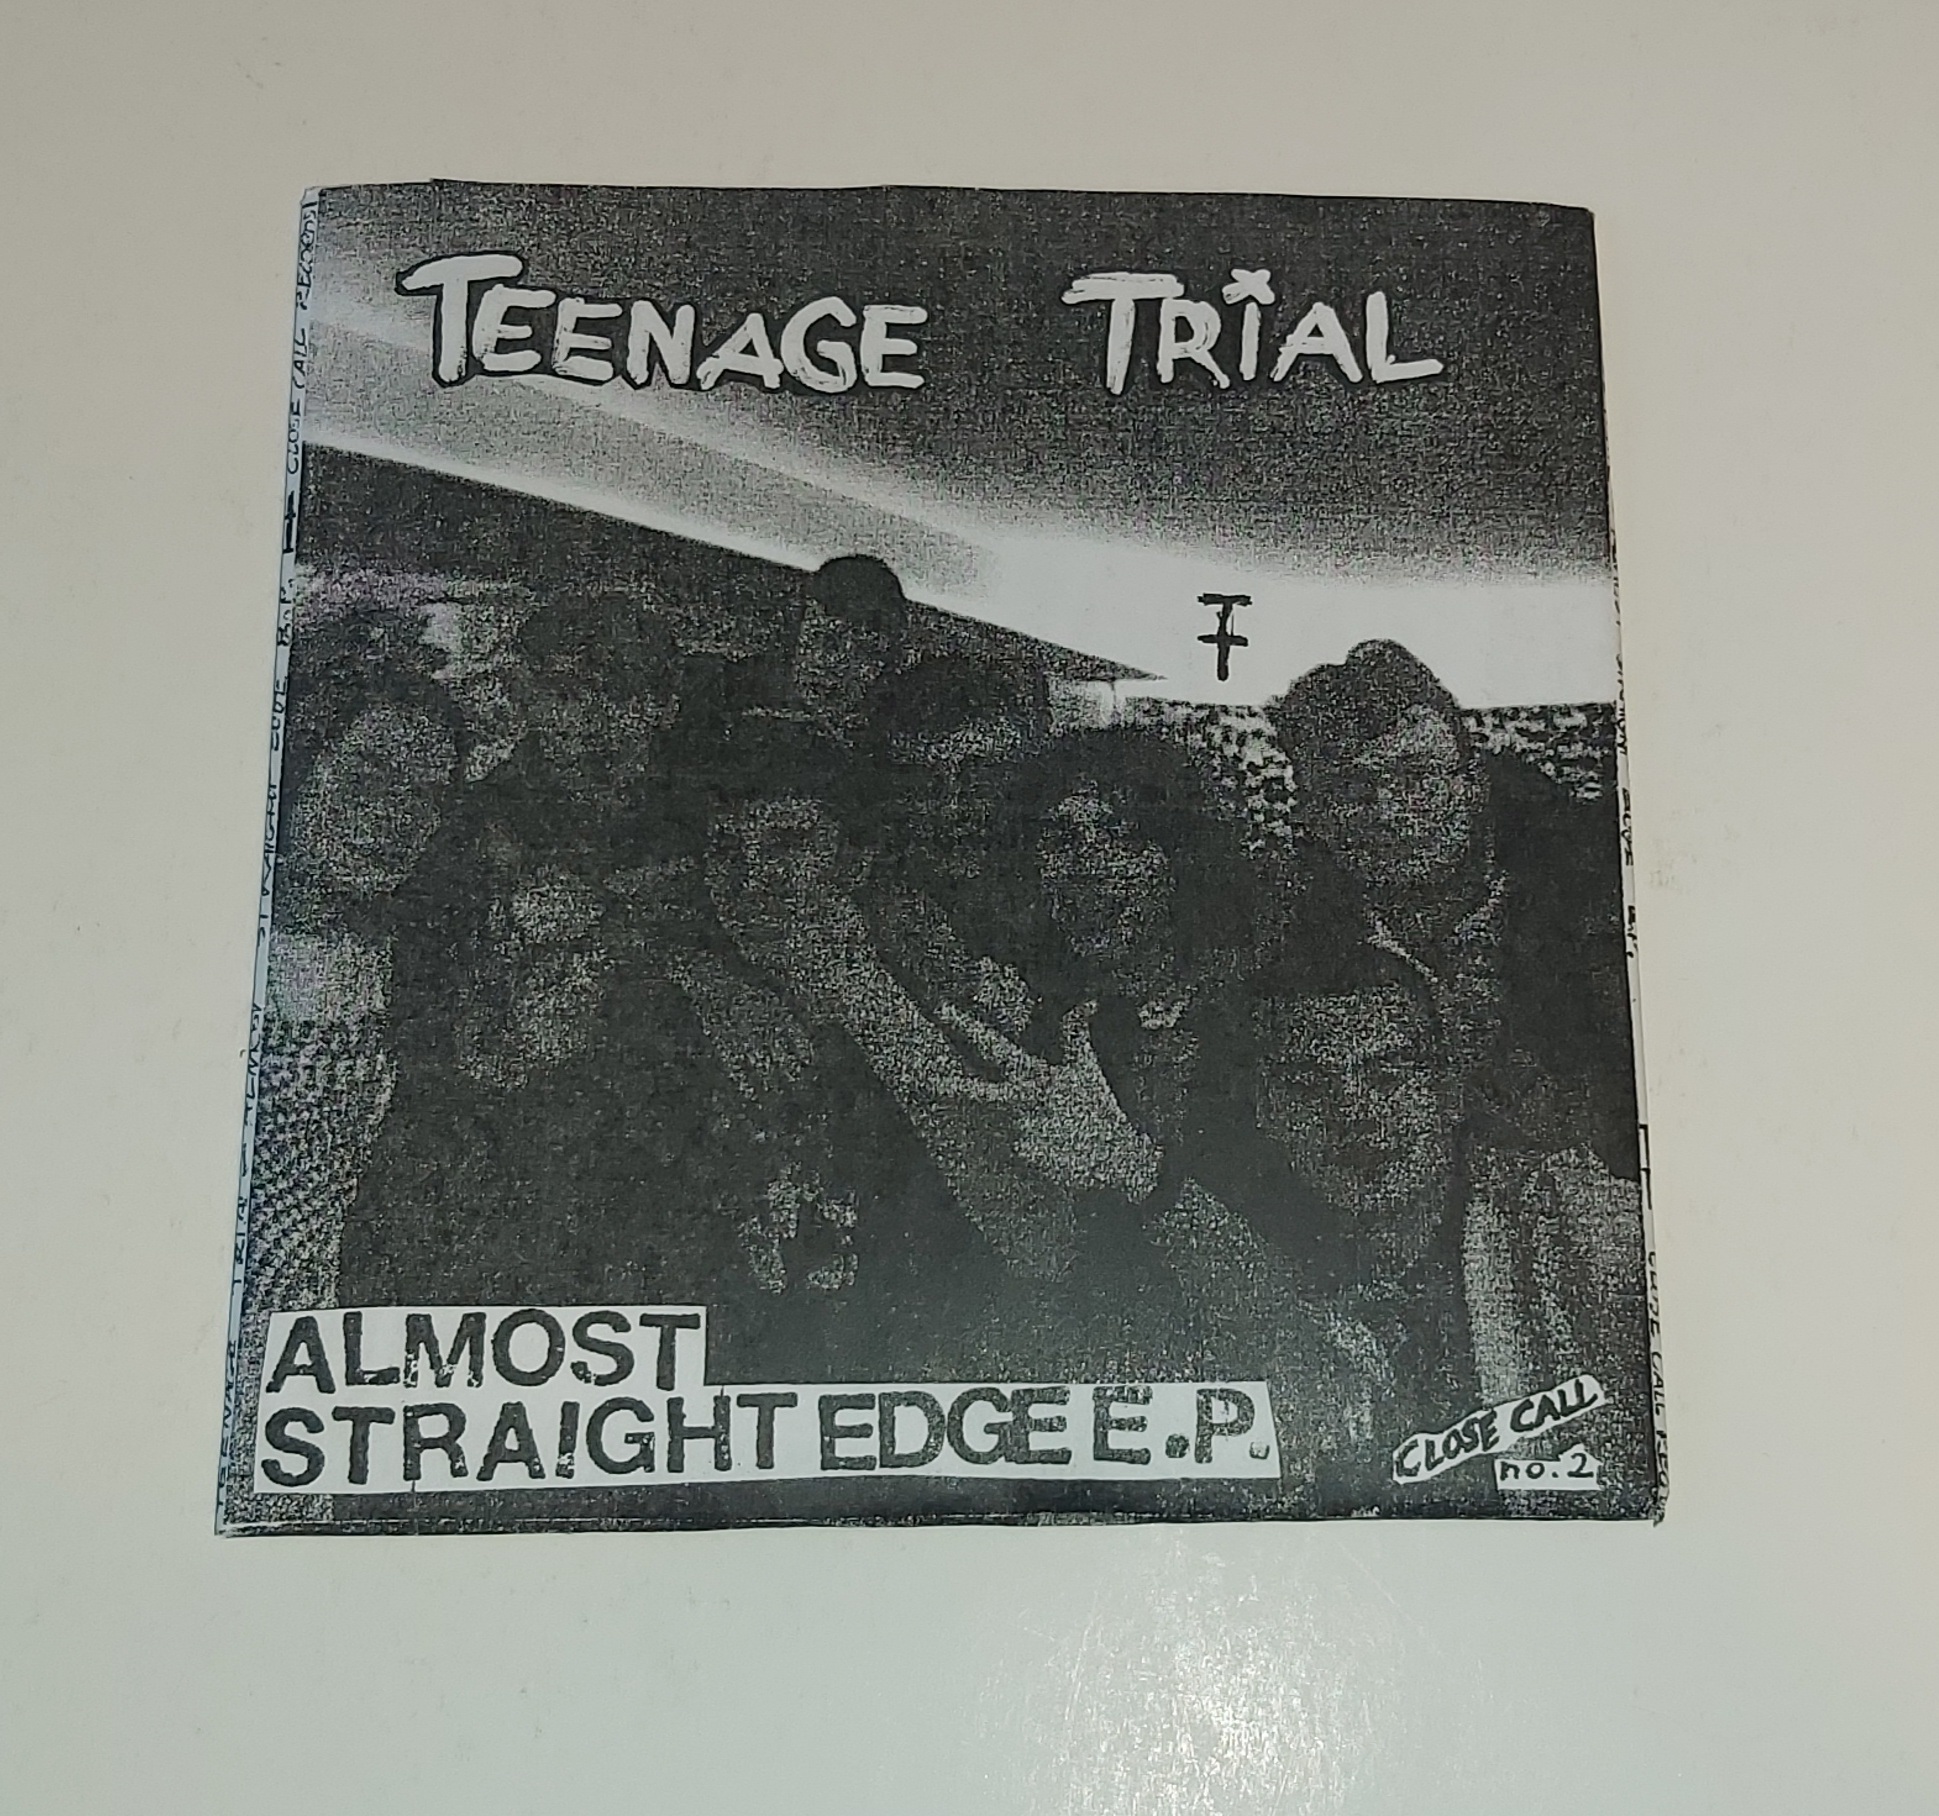 TEENAGE TRIAL "Almost Straight Edge" ep